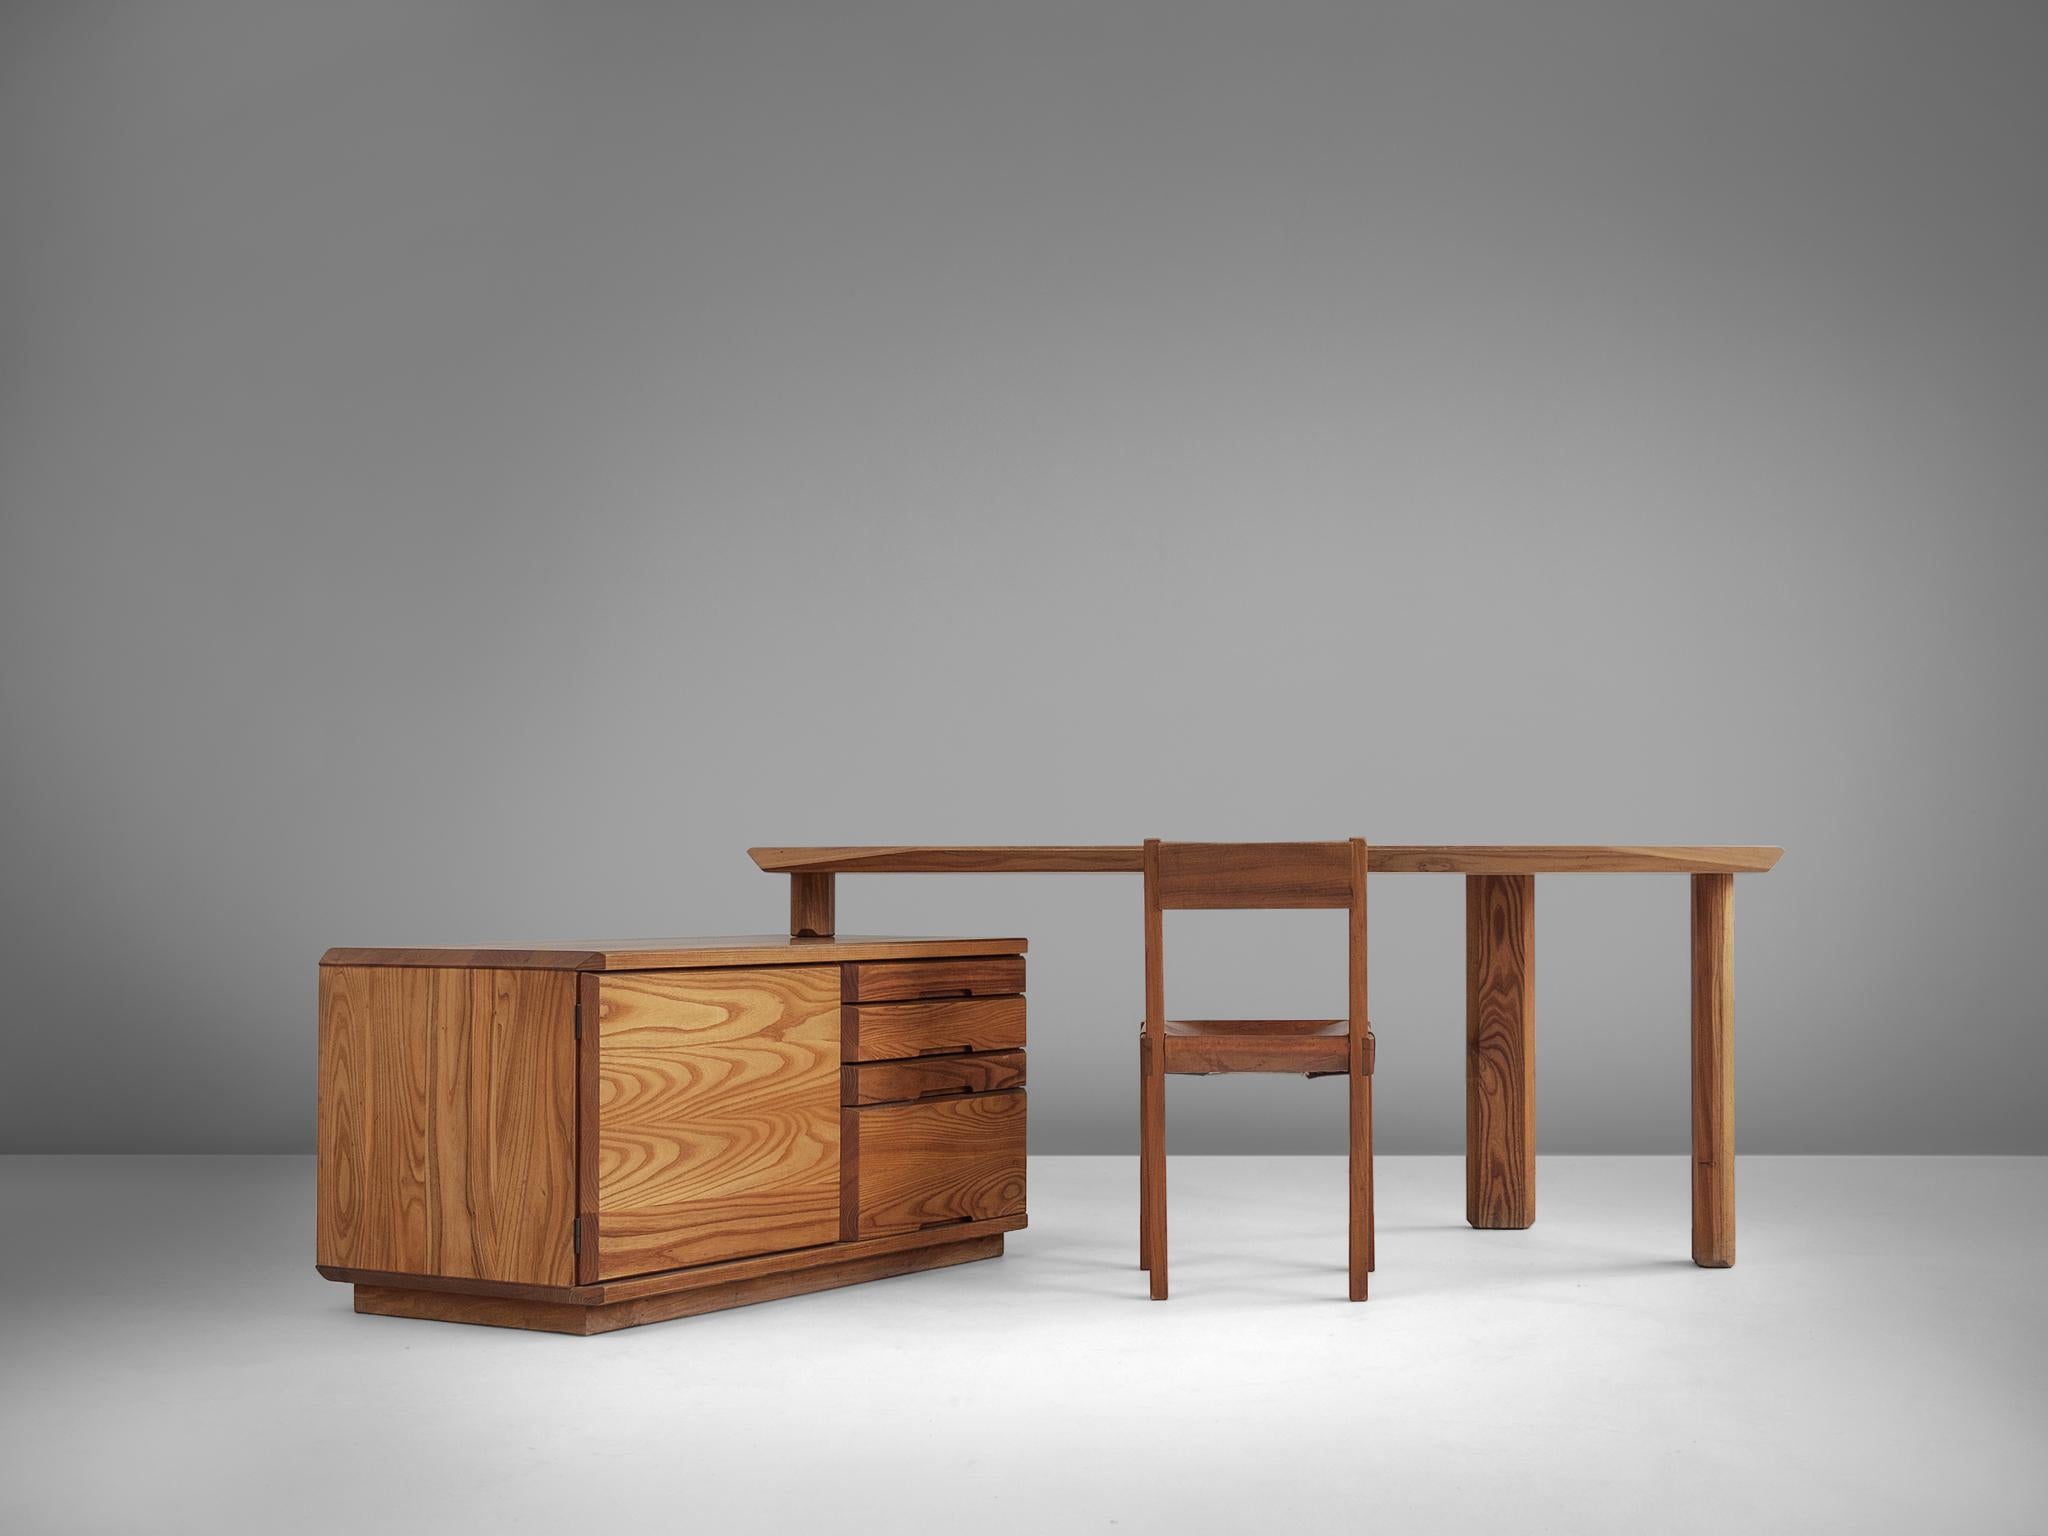 Desk, in solid elm, by Pierre Chapo, France 1960s.
Characteristic desk by French designer and carpenter Pierre Chapo. Eye-catching detail is the beautiful and expressive grain of the elmwood, vissible on the entire item. The tabletop is polygonal